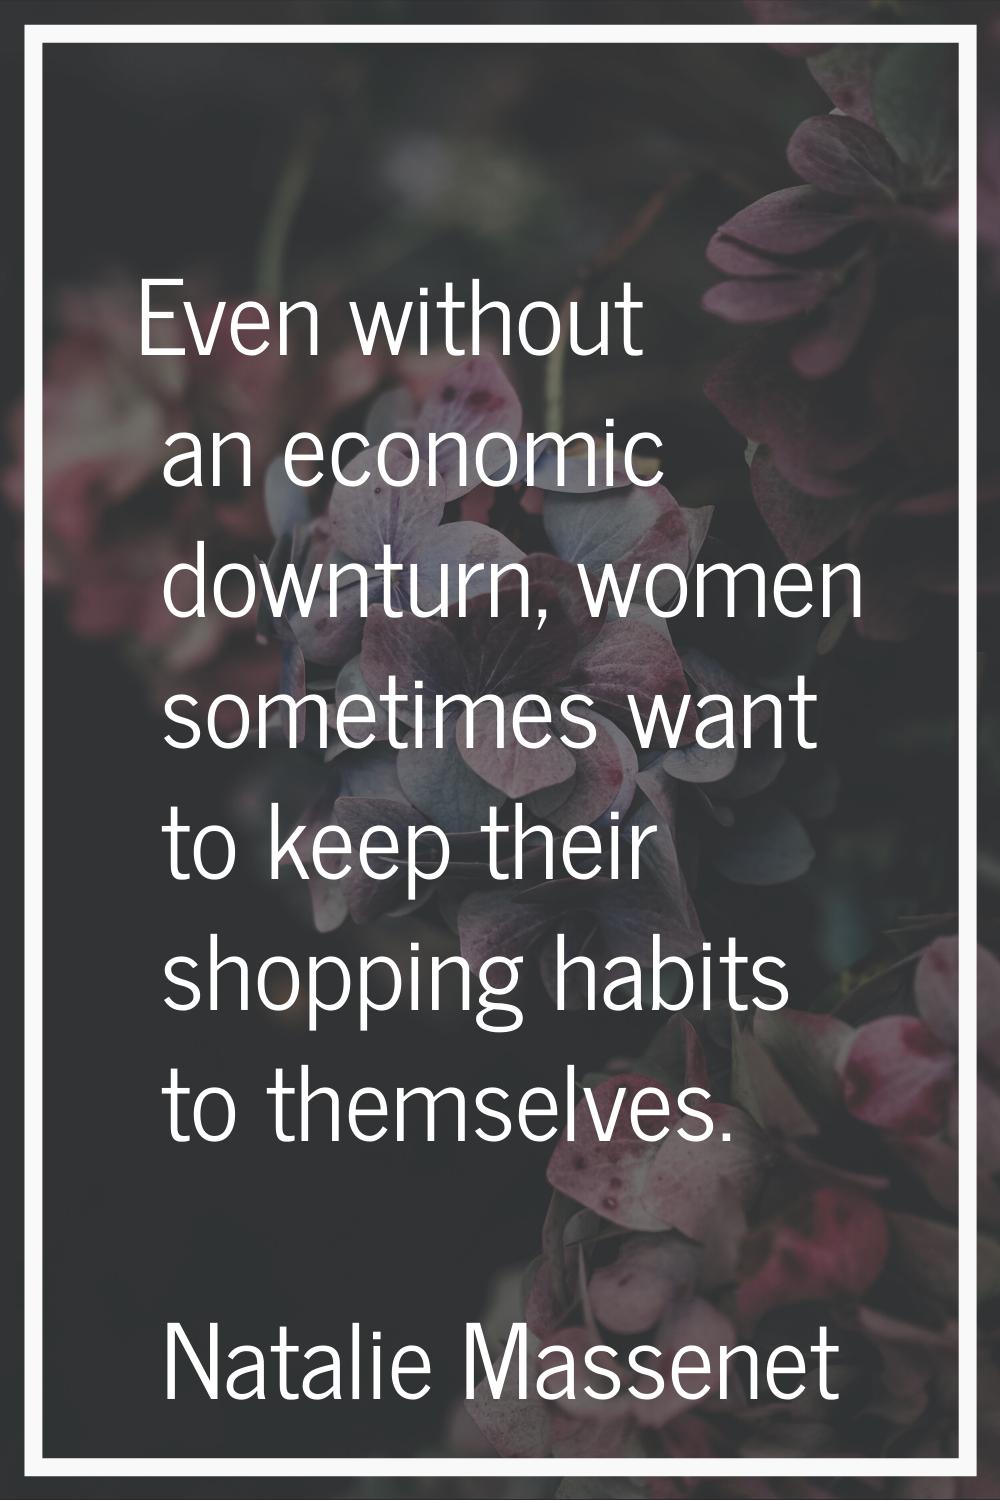 Even without an economic downturn, women sometimes want to keep their shopping habits to themselves